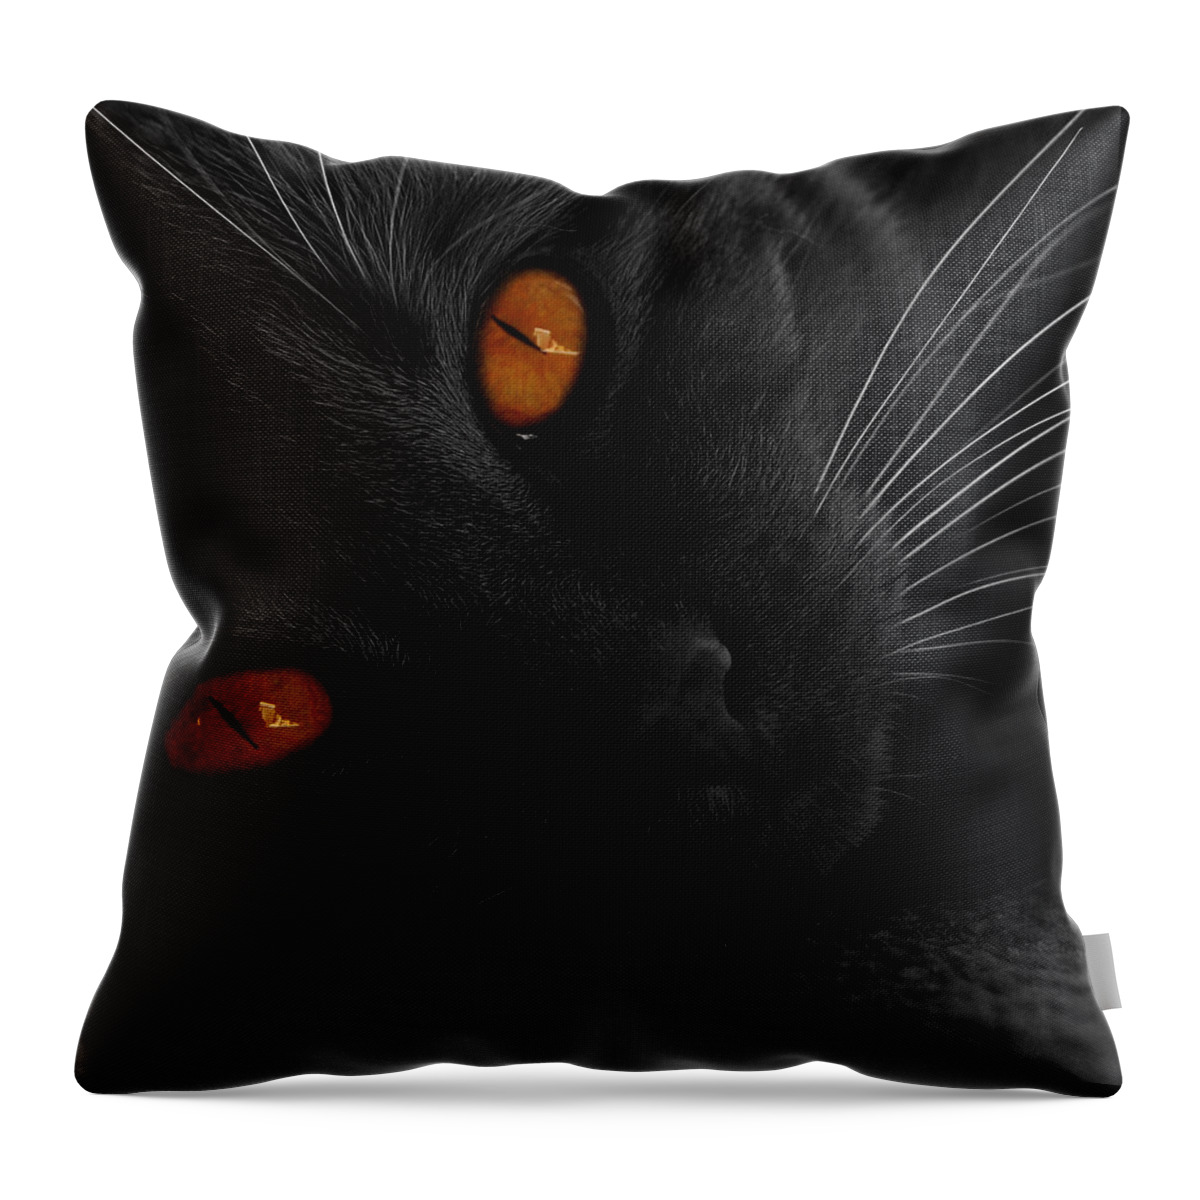  Throw Pillow featuring the photograph Jill by J C